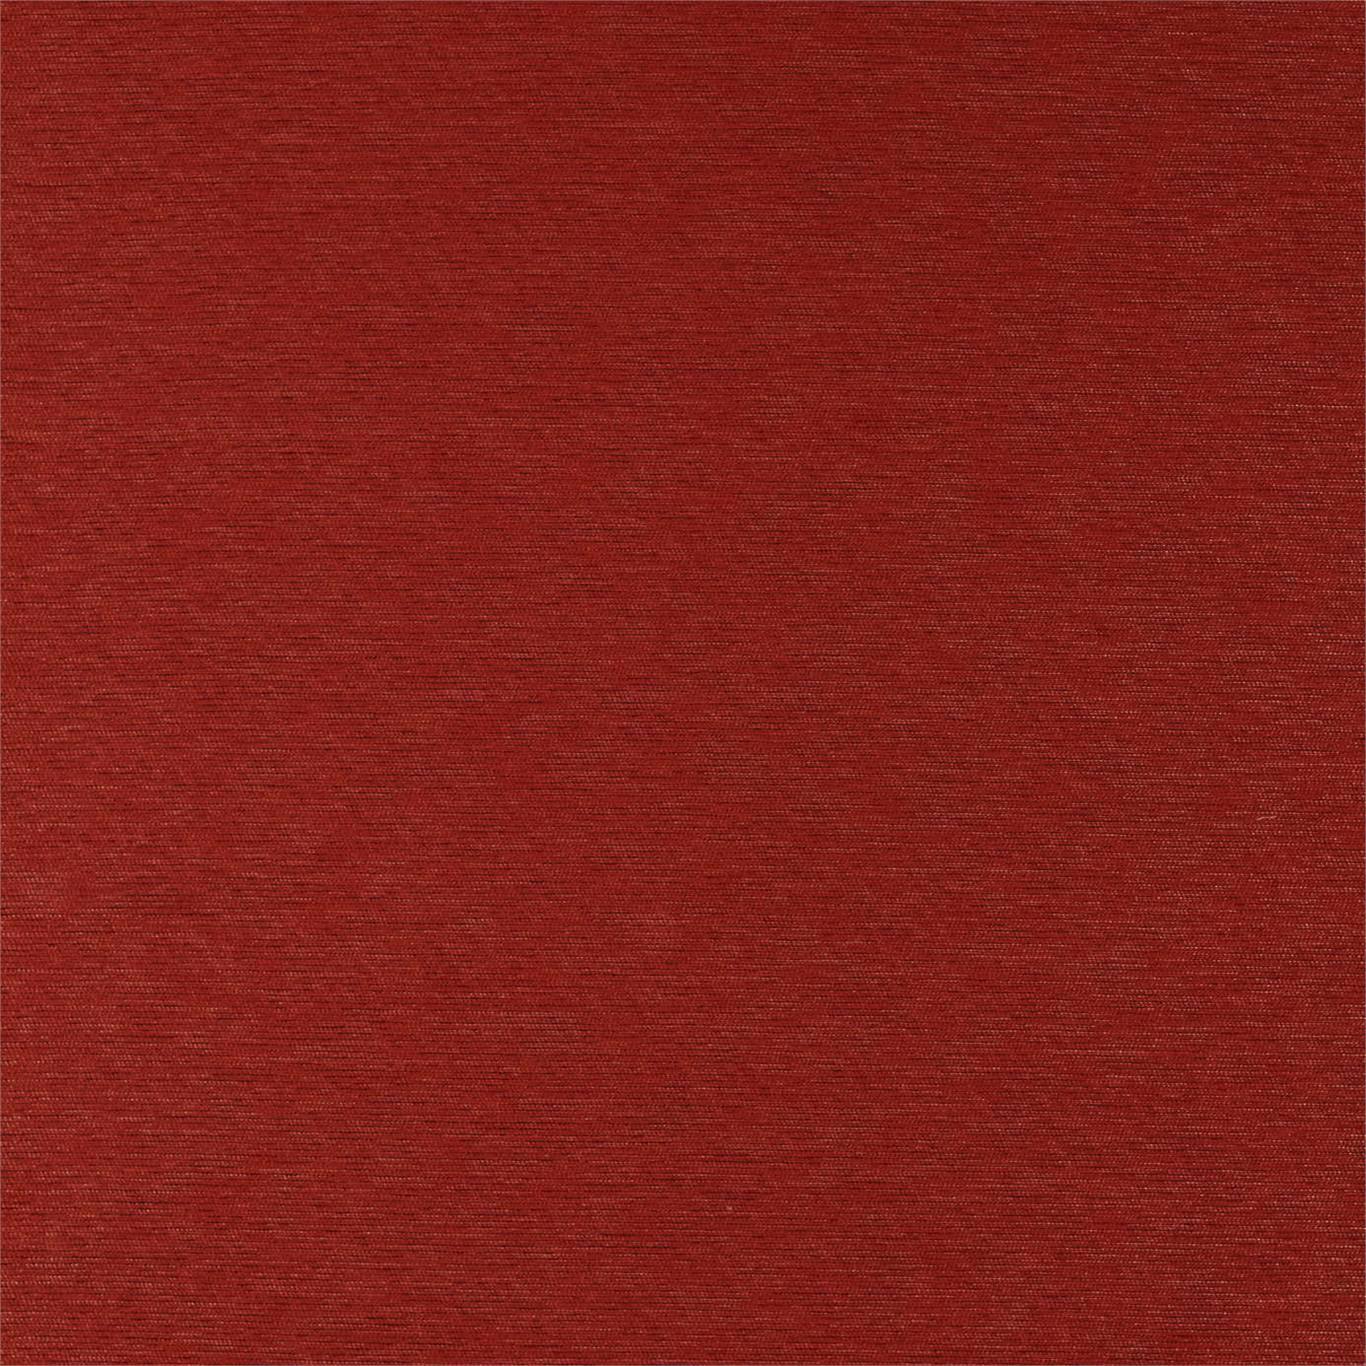 Lineate Russet Fabric by HAR